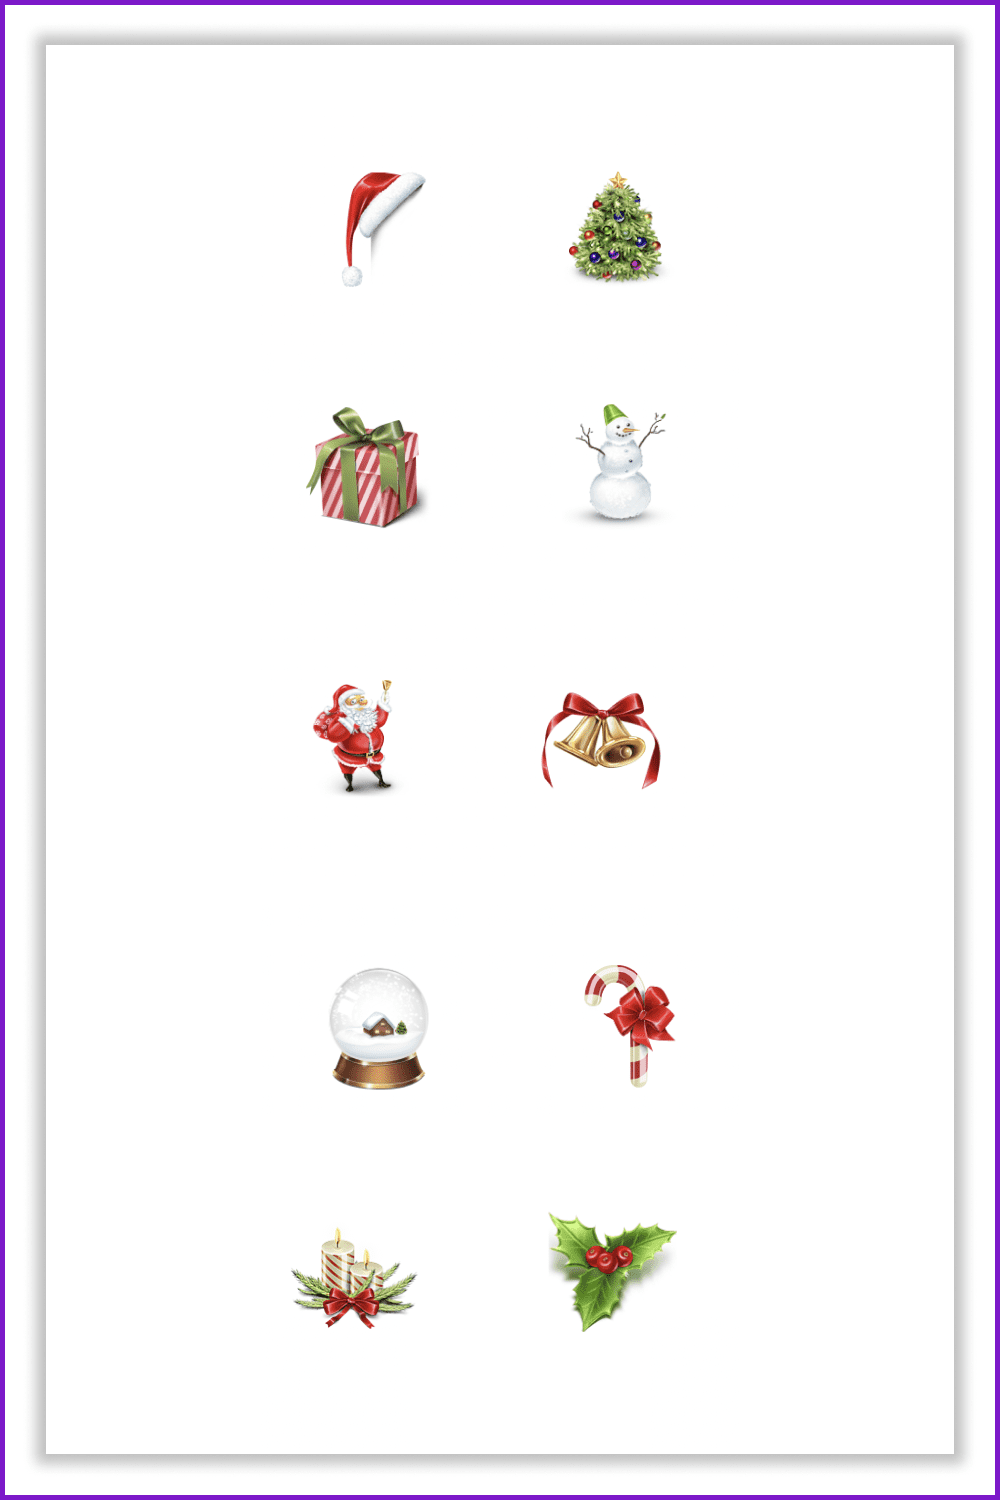 A collage of Christmas icons, very carefully drawn.